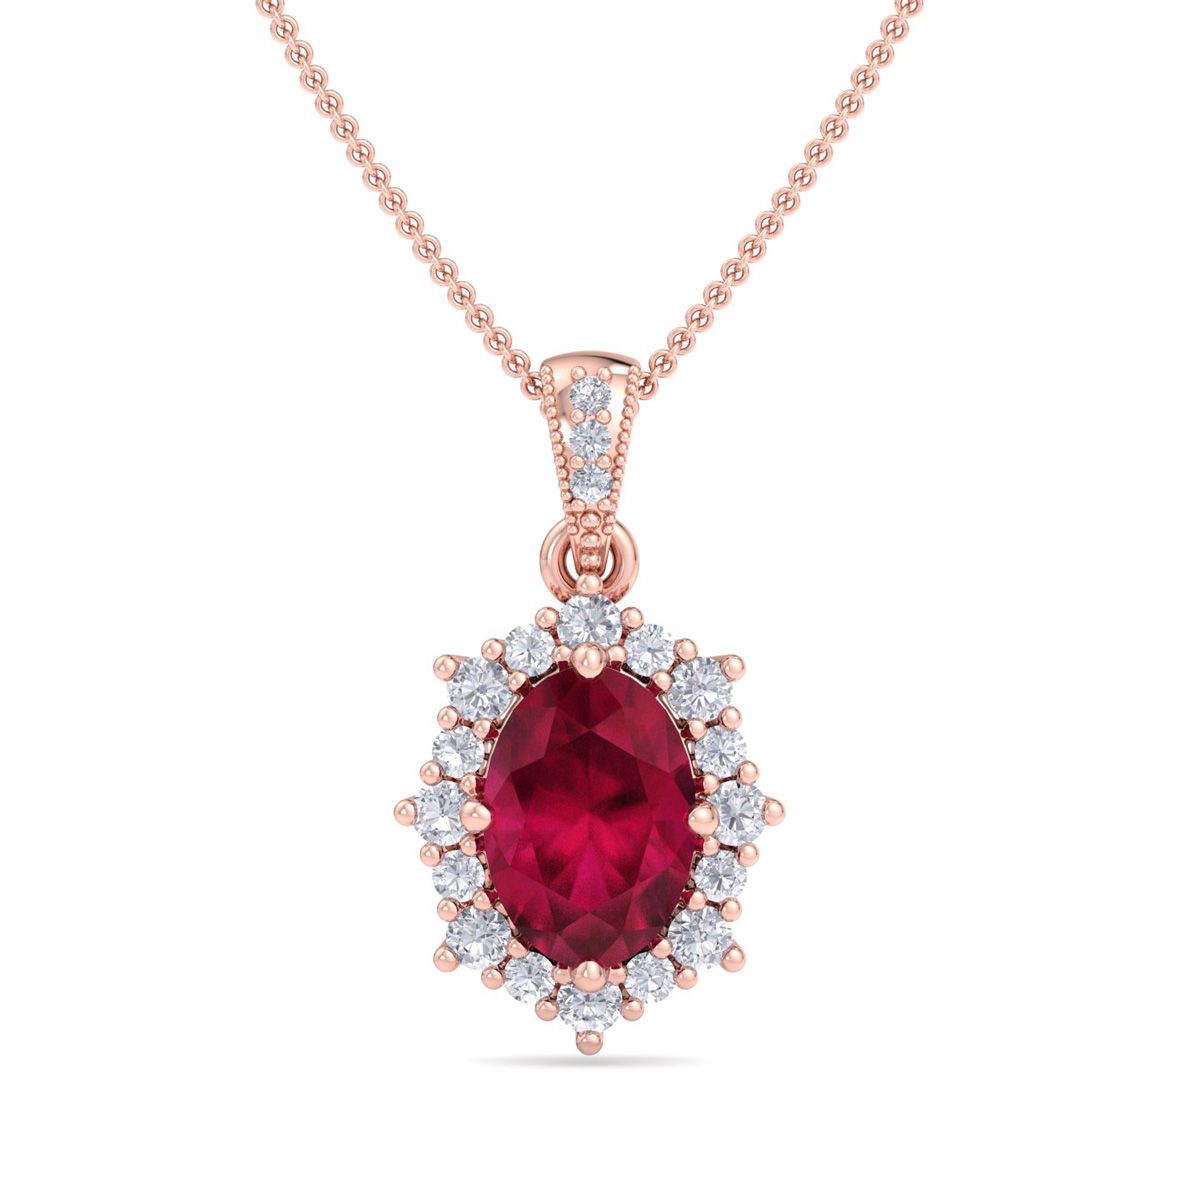 Sselects 1 3/4 Carat Oval Shape Ruby And Diamond Necklace In 14k In Multi